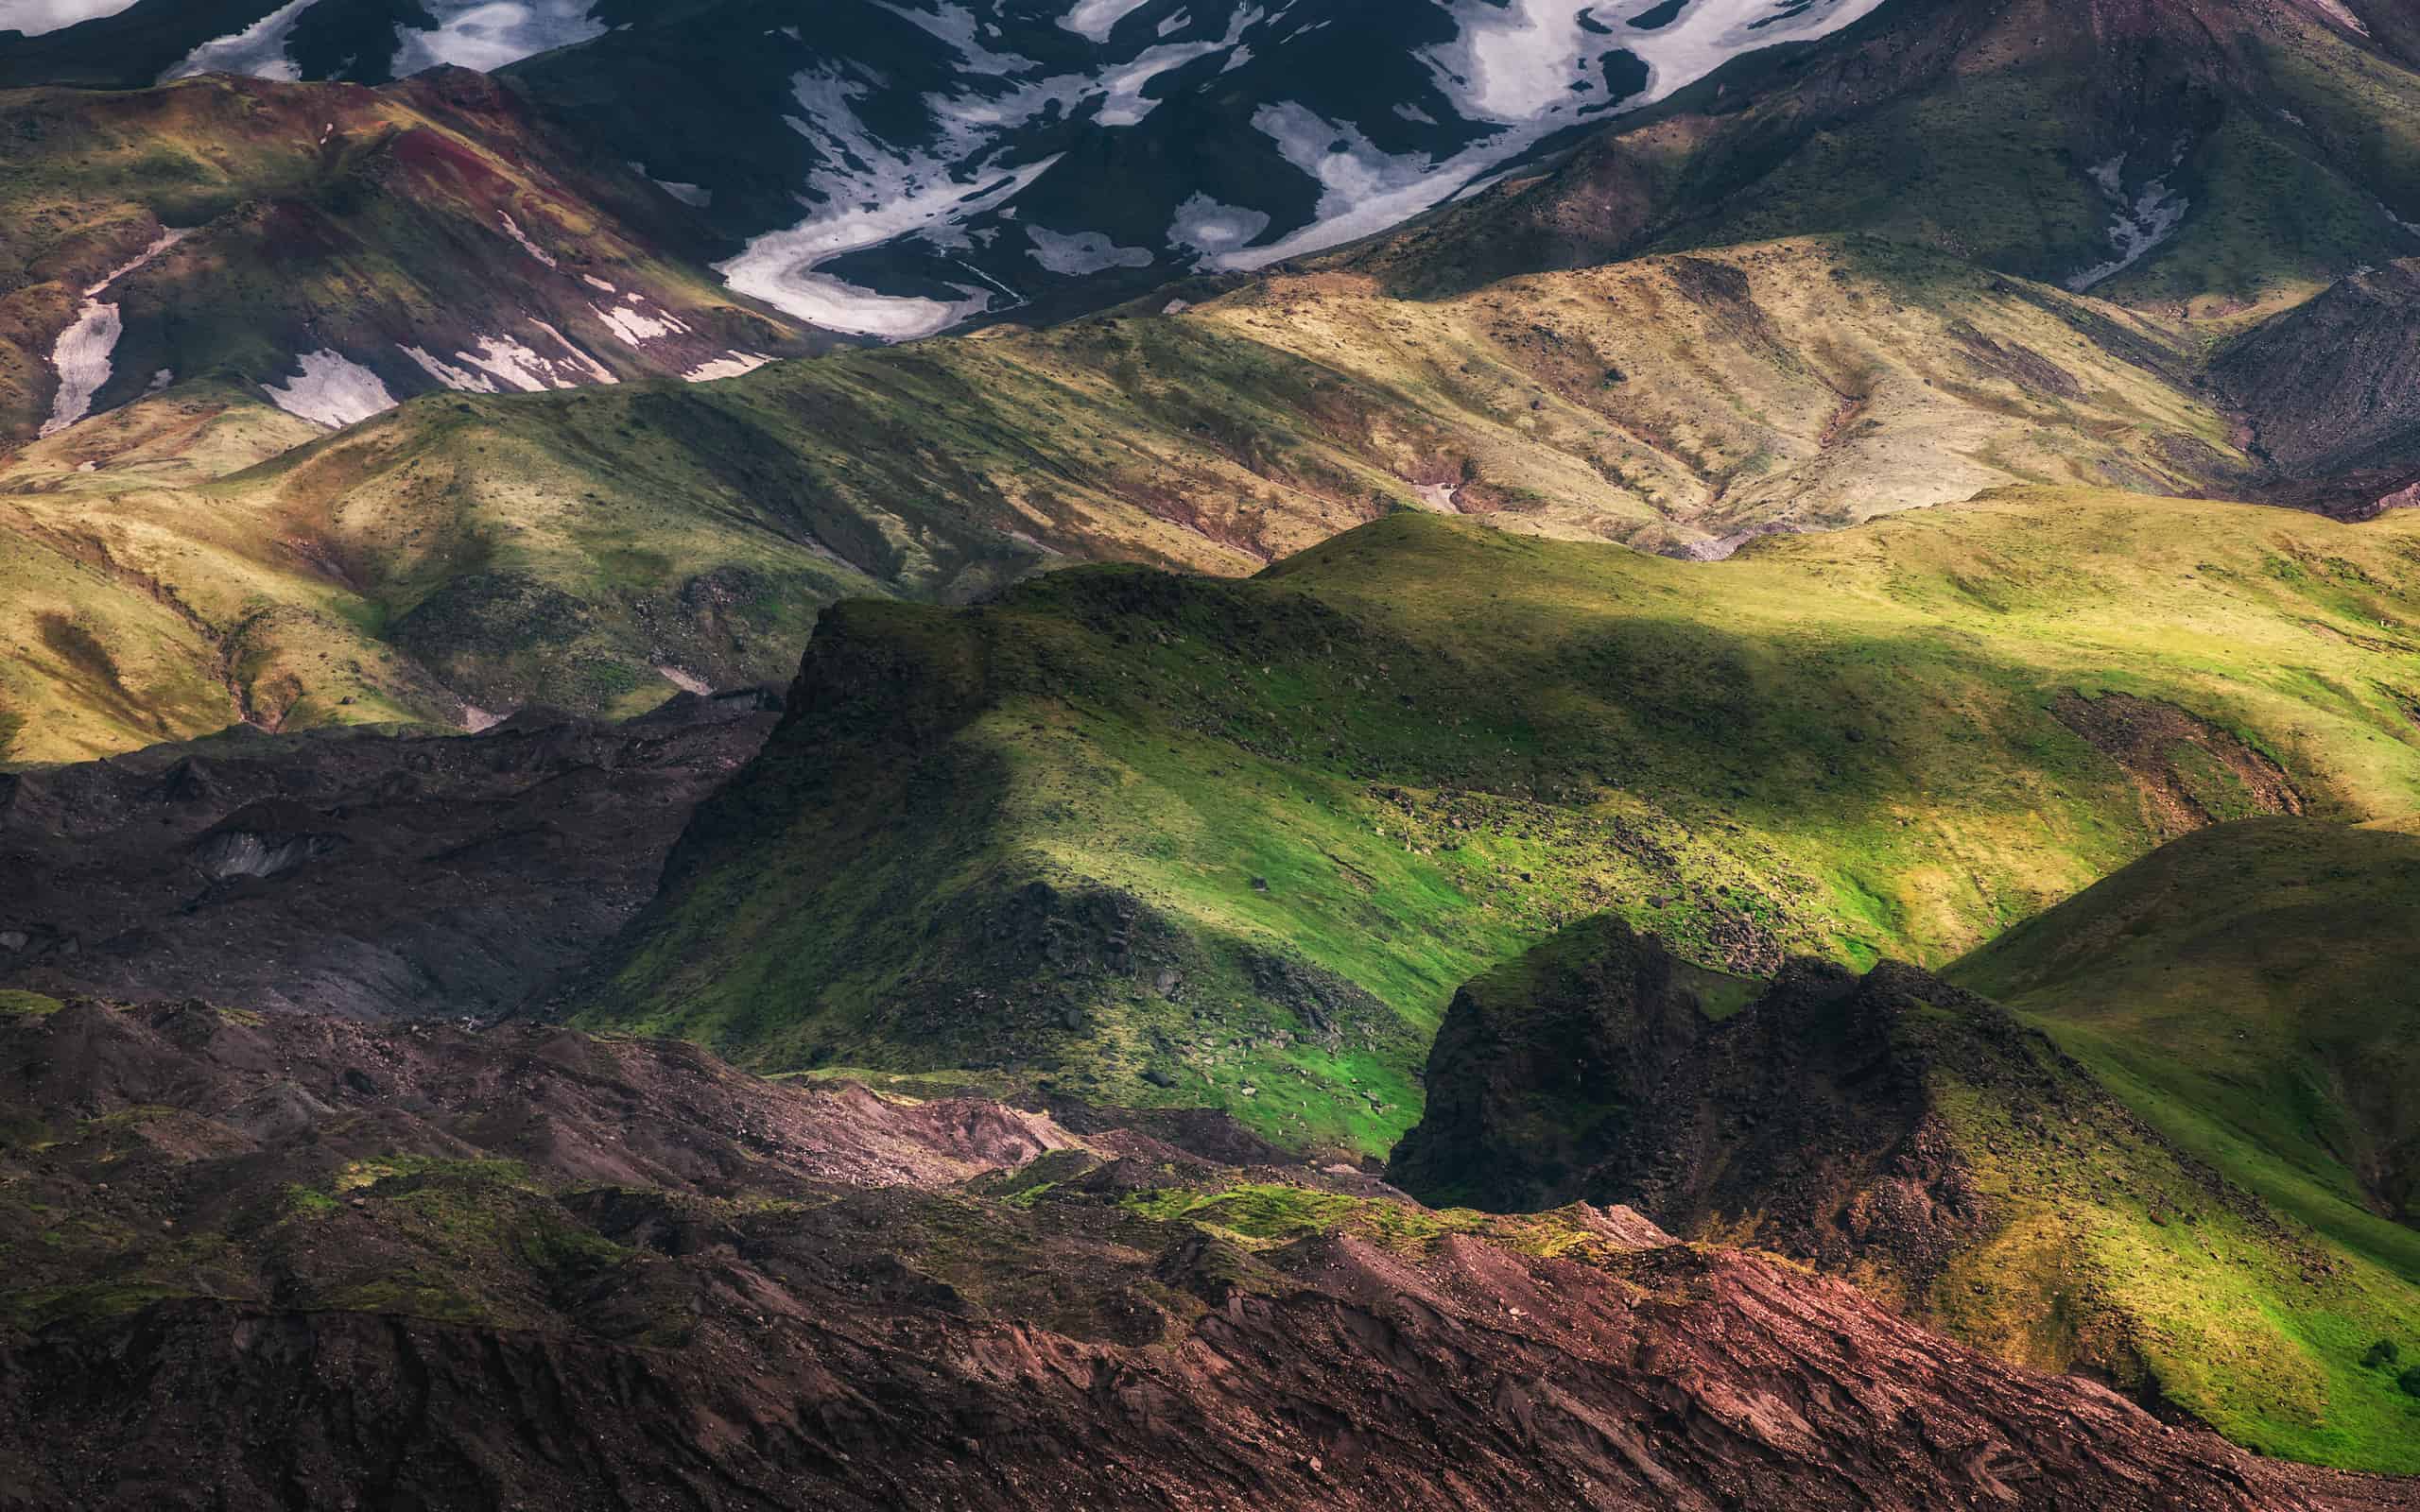 Green grass and snow on the rocks of Tolbachik volcano, Kamchatka, Russia.